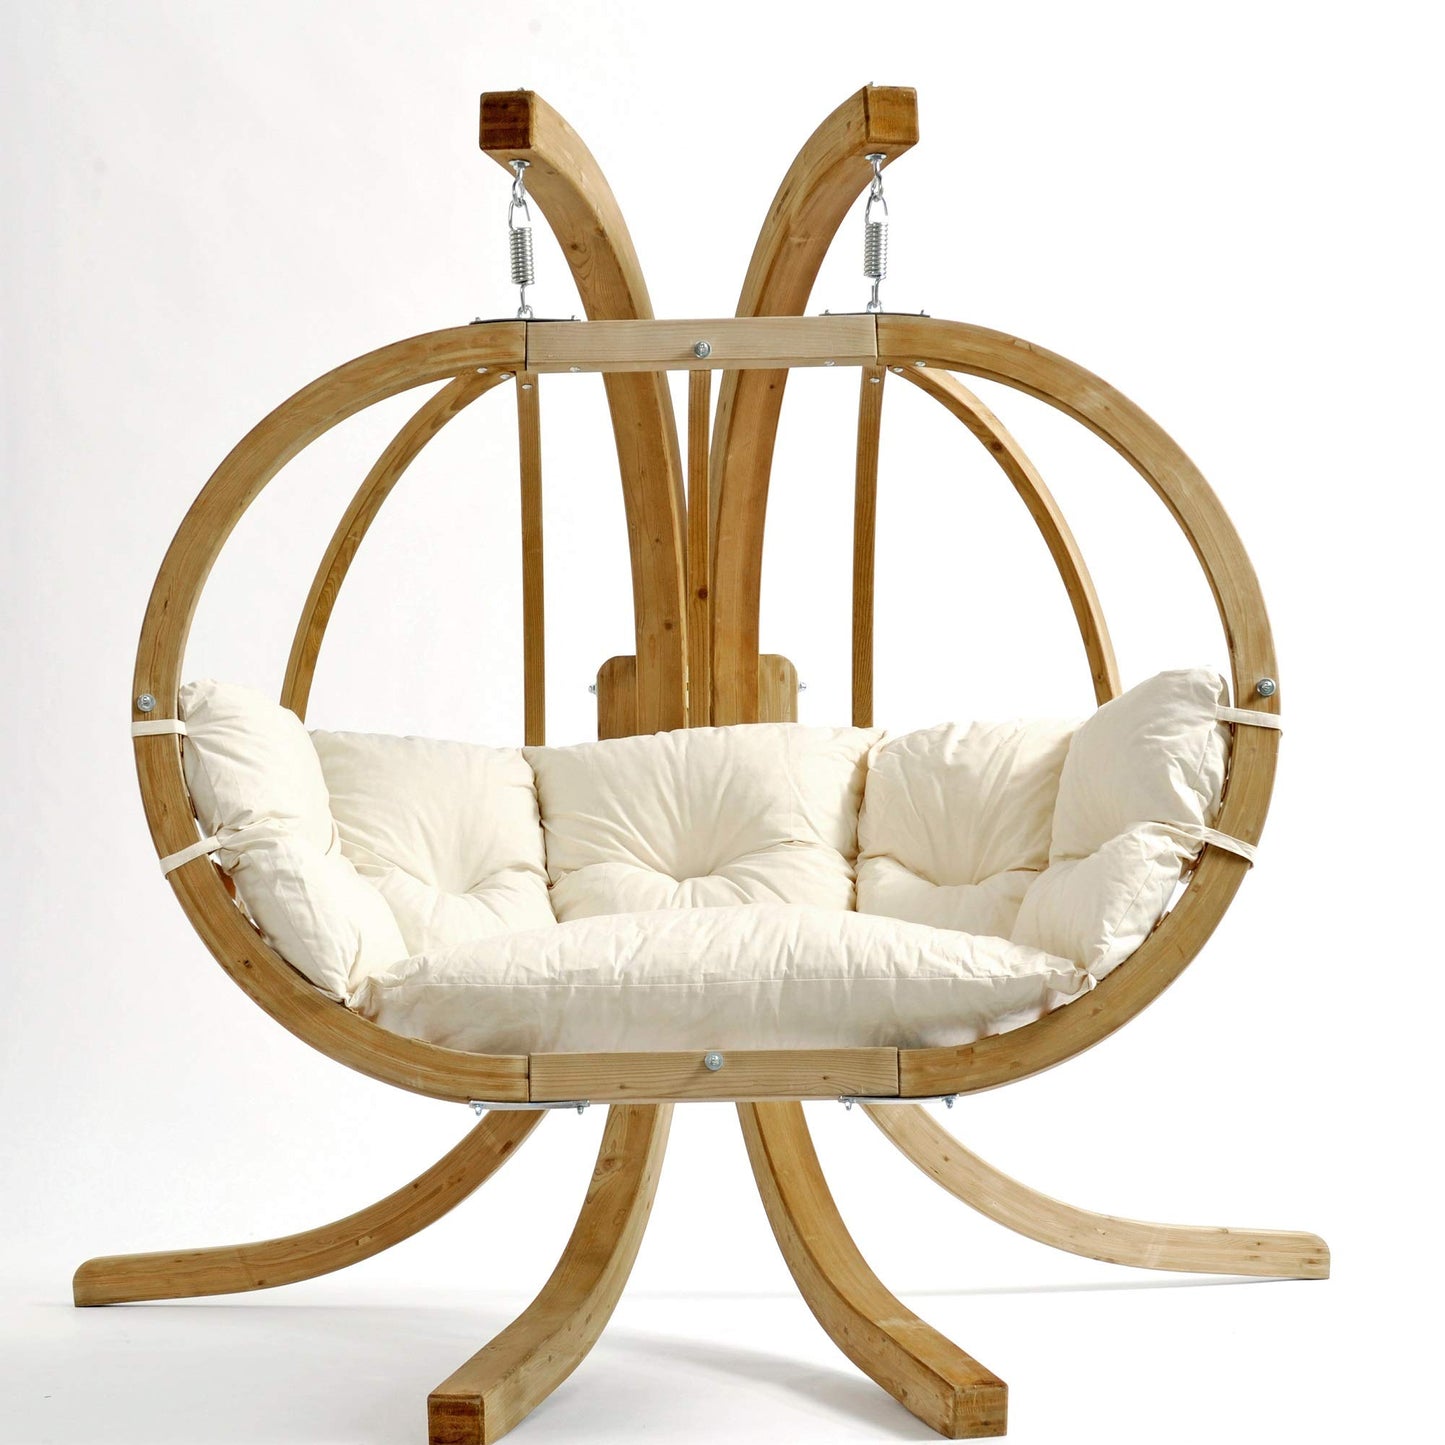 Double Globo Hanging Chair with White Cushions - Outdoor Living and Style